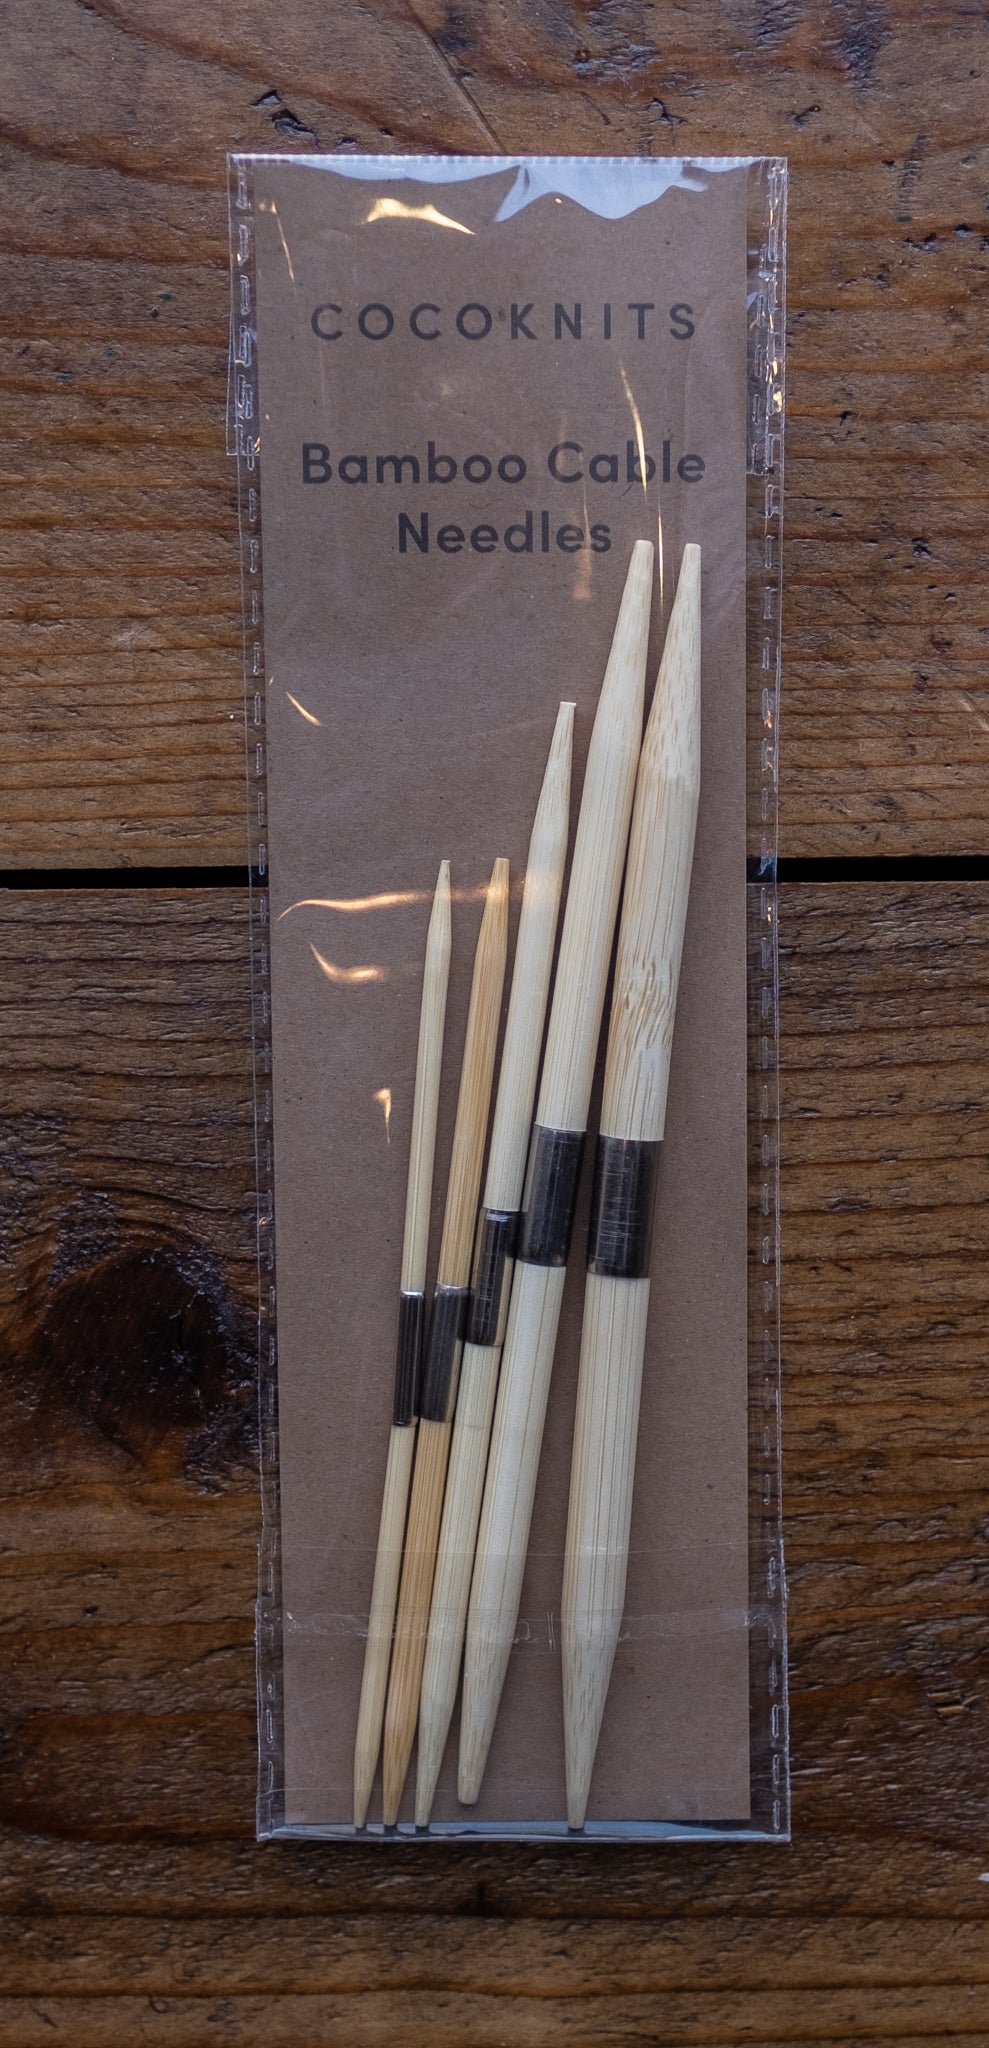 Bamboo Cable Needles - Cocoknits